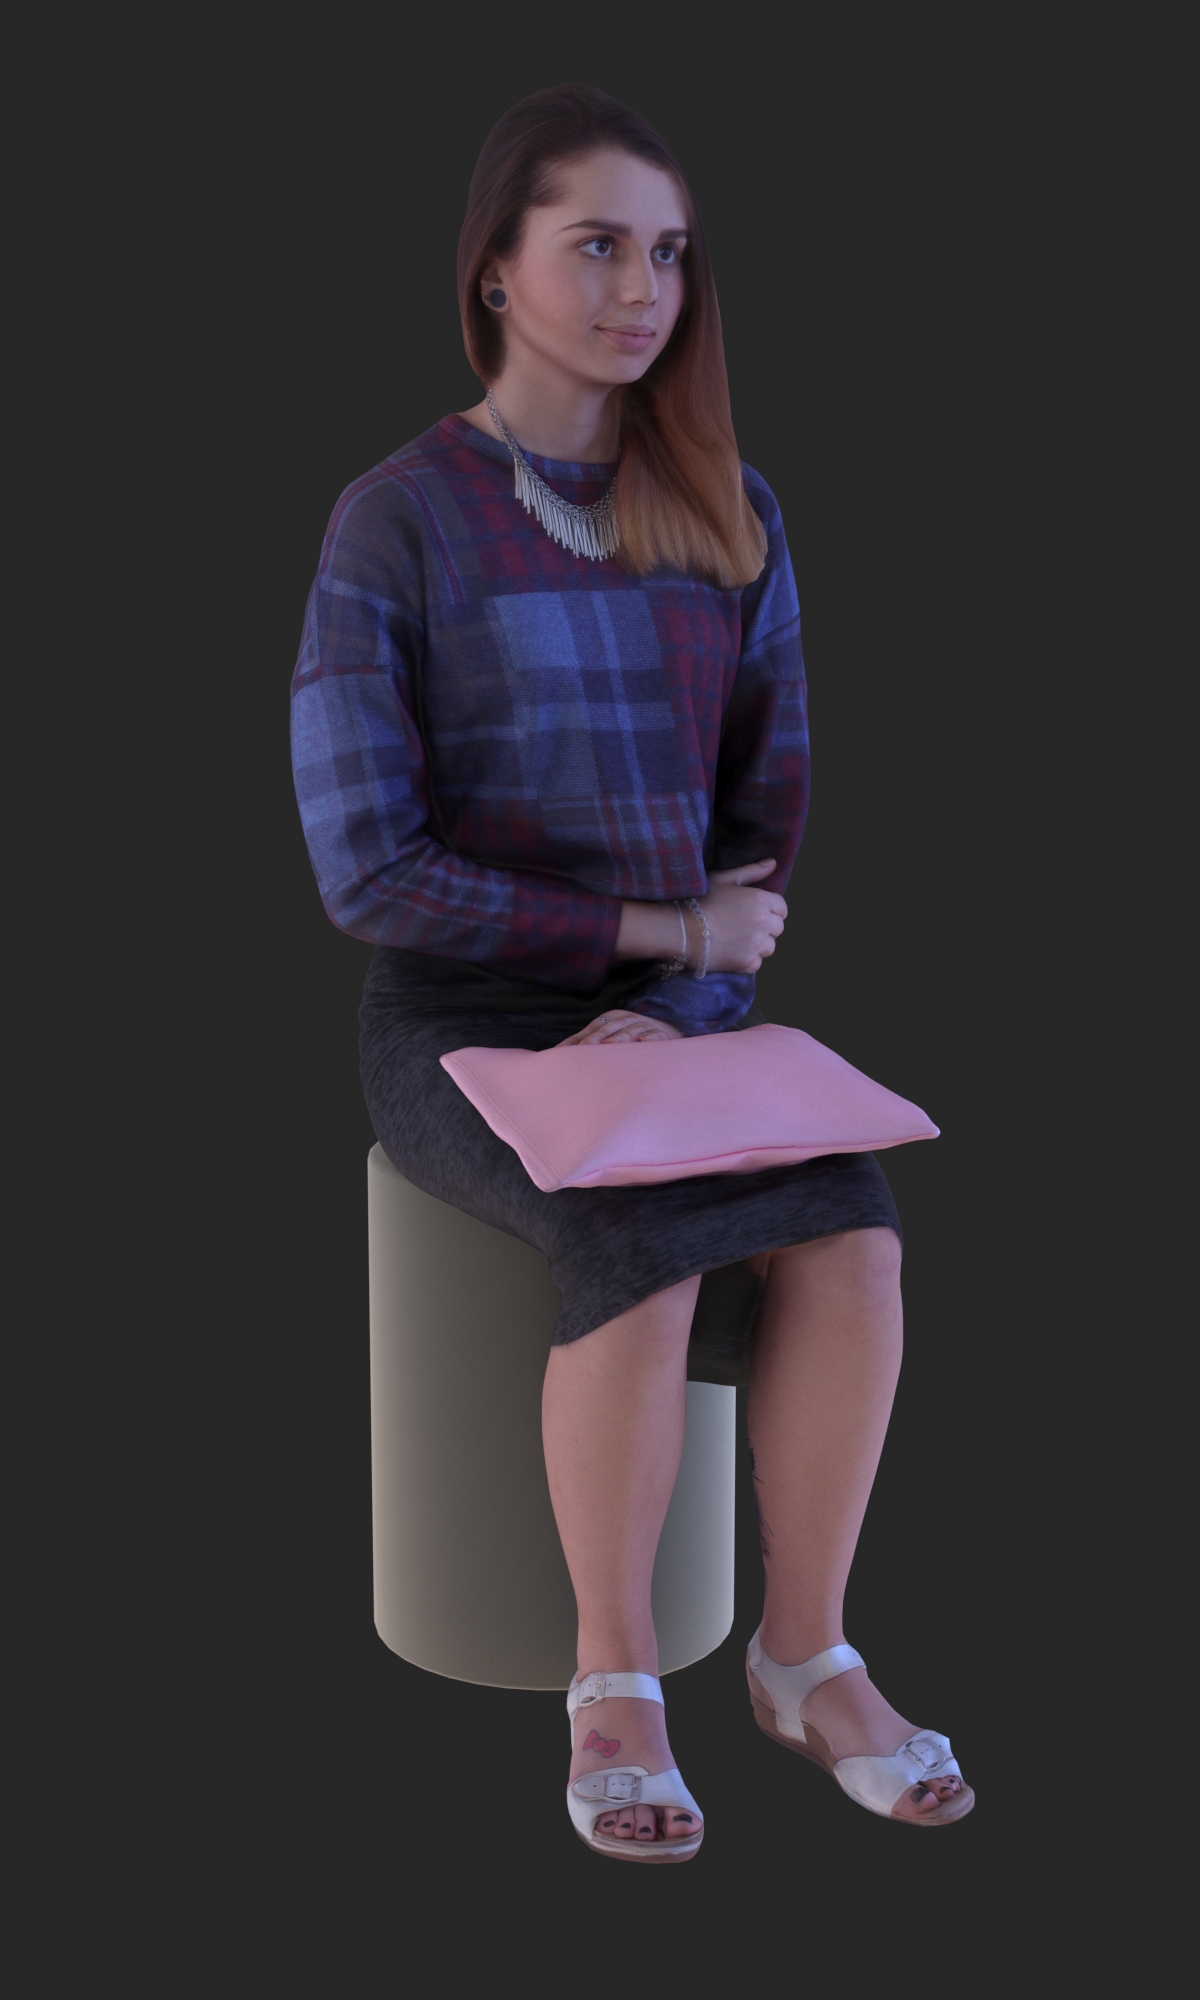 3DSKY FREE – HUMAN 3D – POSED PEOPLE – No.010